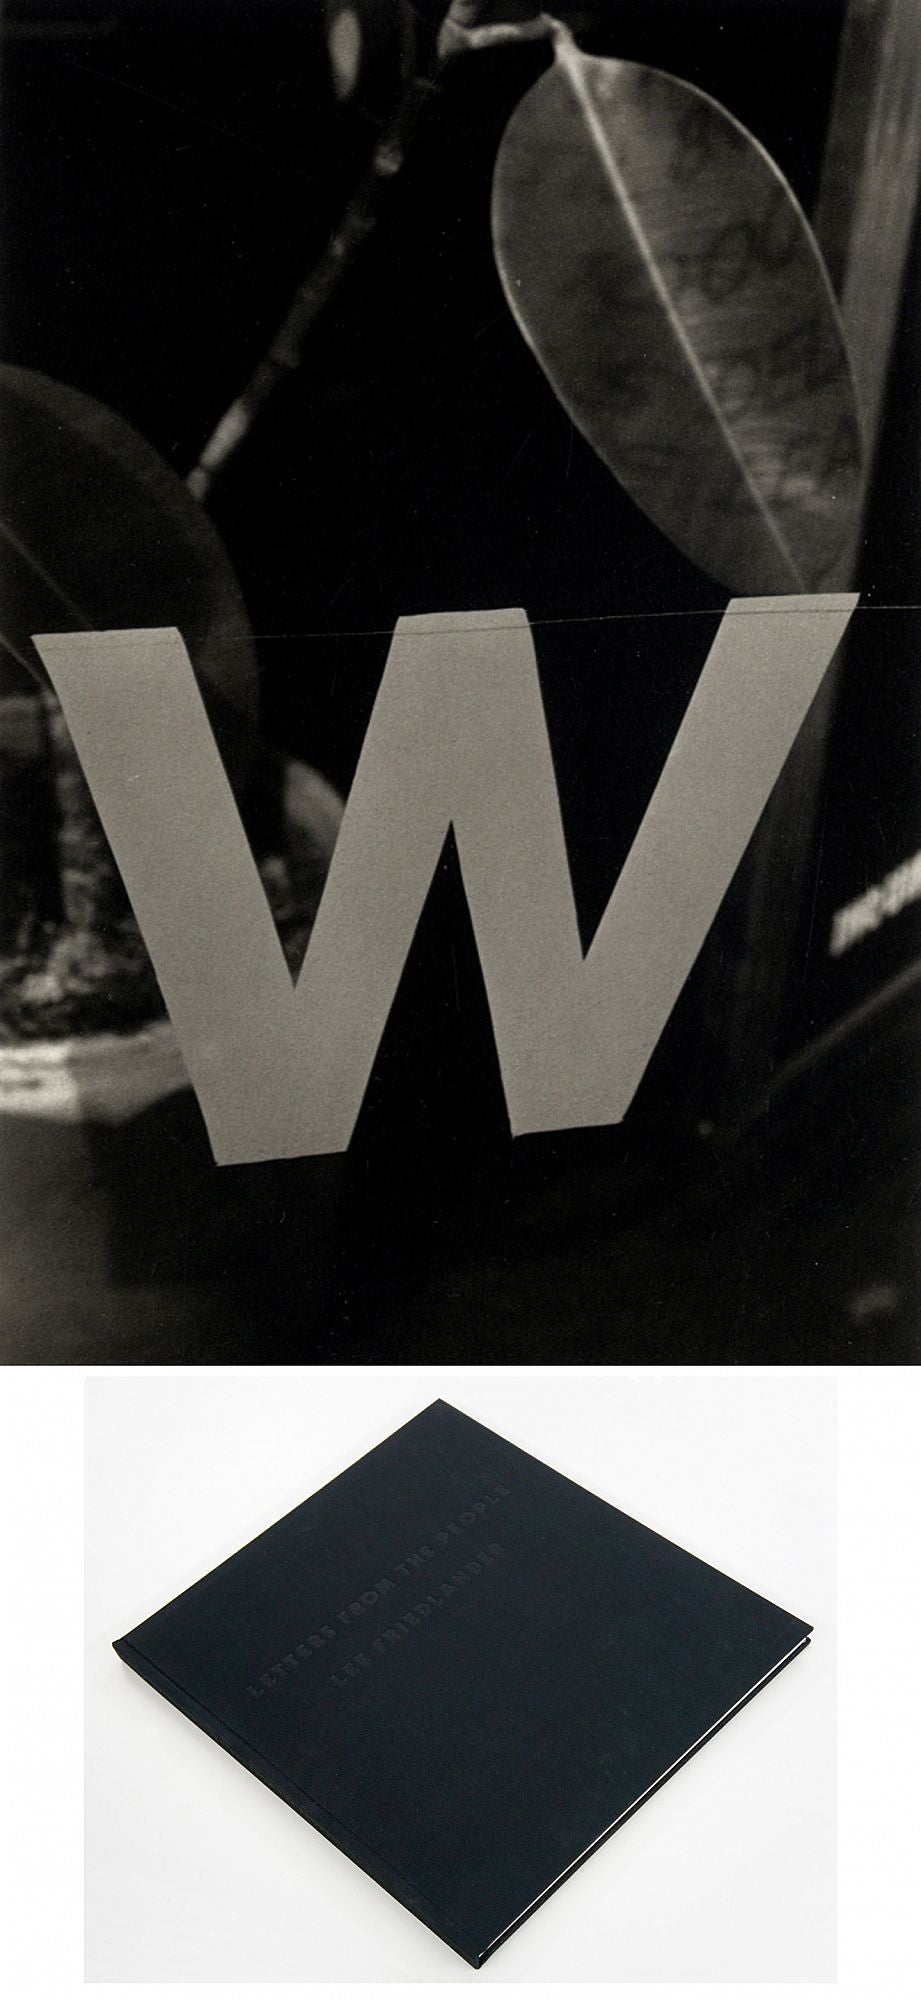 Lee Friedlander: Letters from the People (Special Limited Edition with One Vintage Gelatin Silver Print: "W")